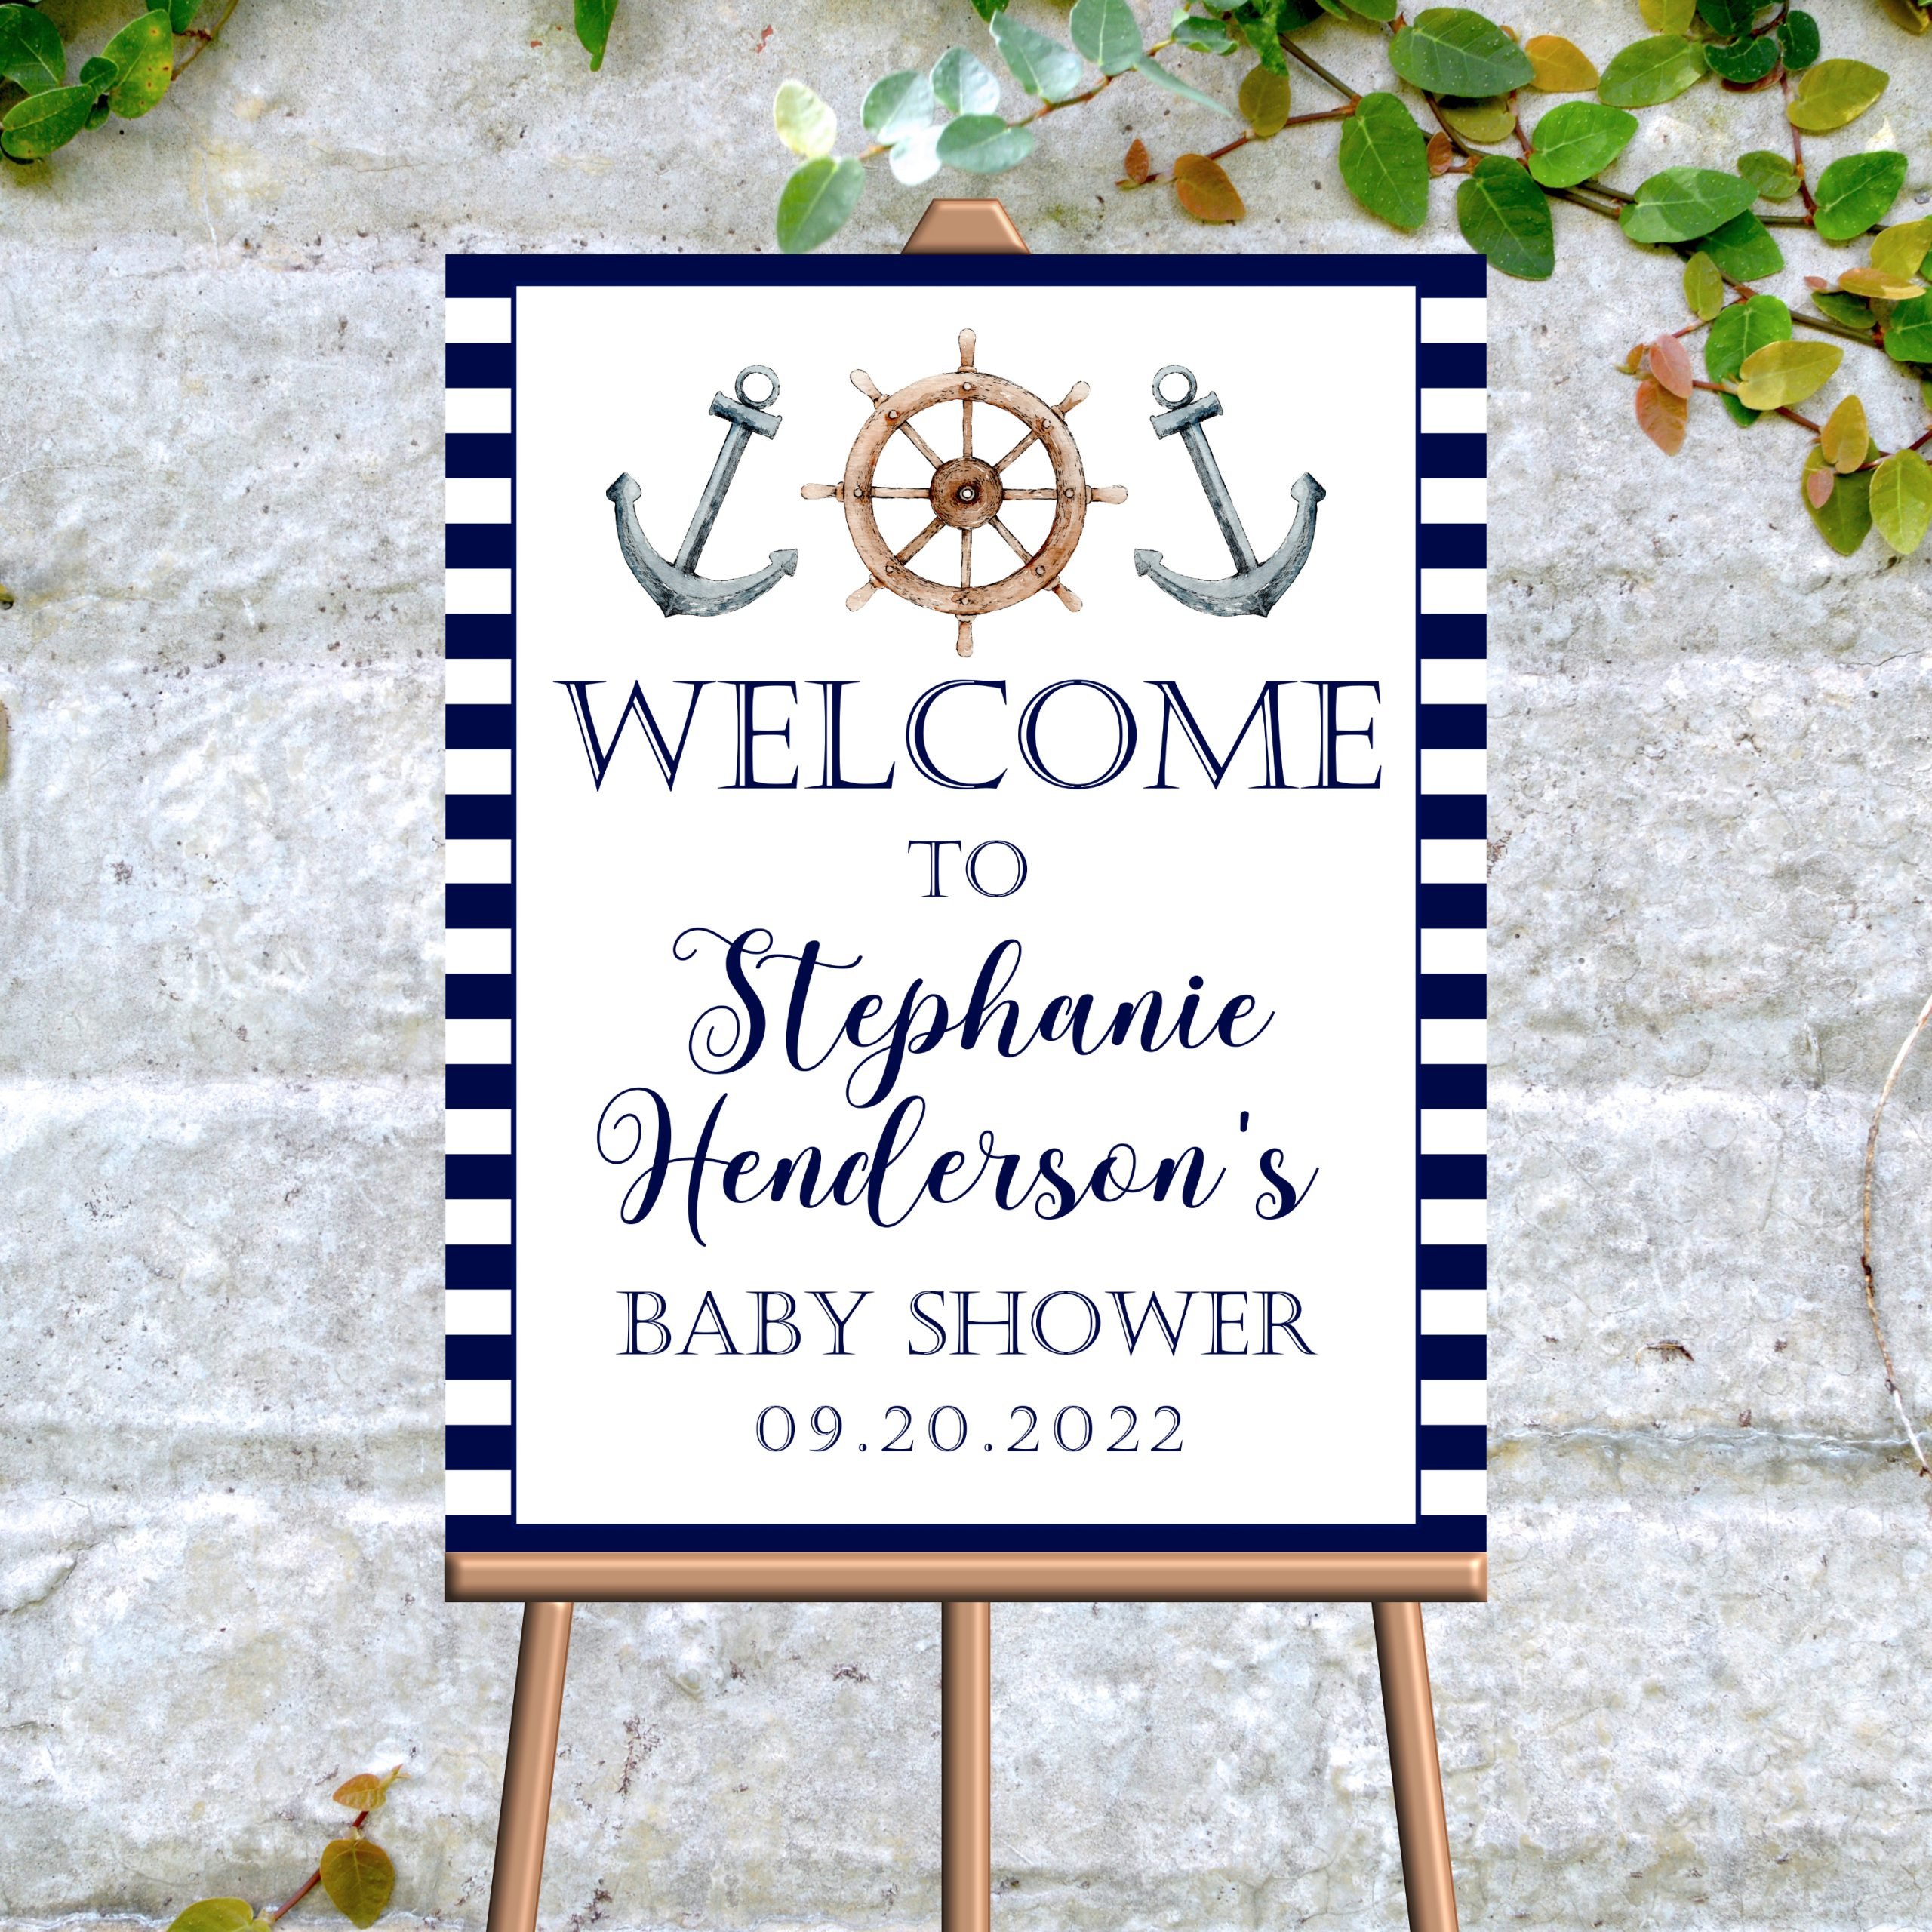 DECOR | SIGNS Editable Nautical Welcome Sign | Baby Shower Decor | Birthday Party | Bridal Shower Sign | Corjl Template | Digital Download | PRINTABLE anchor and ship wheel design